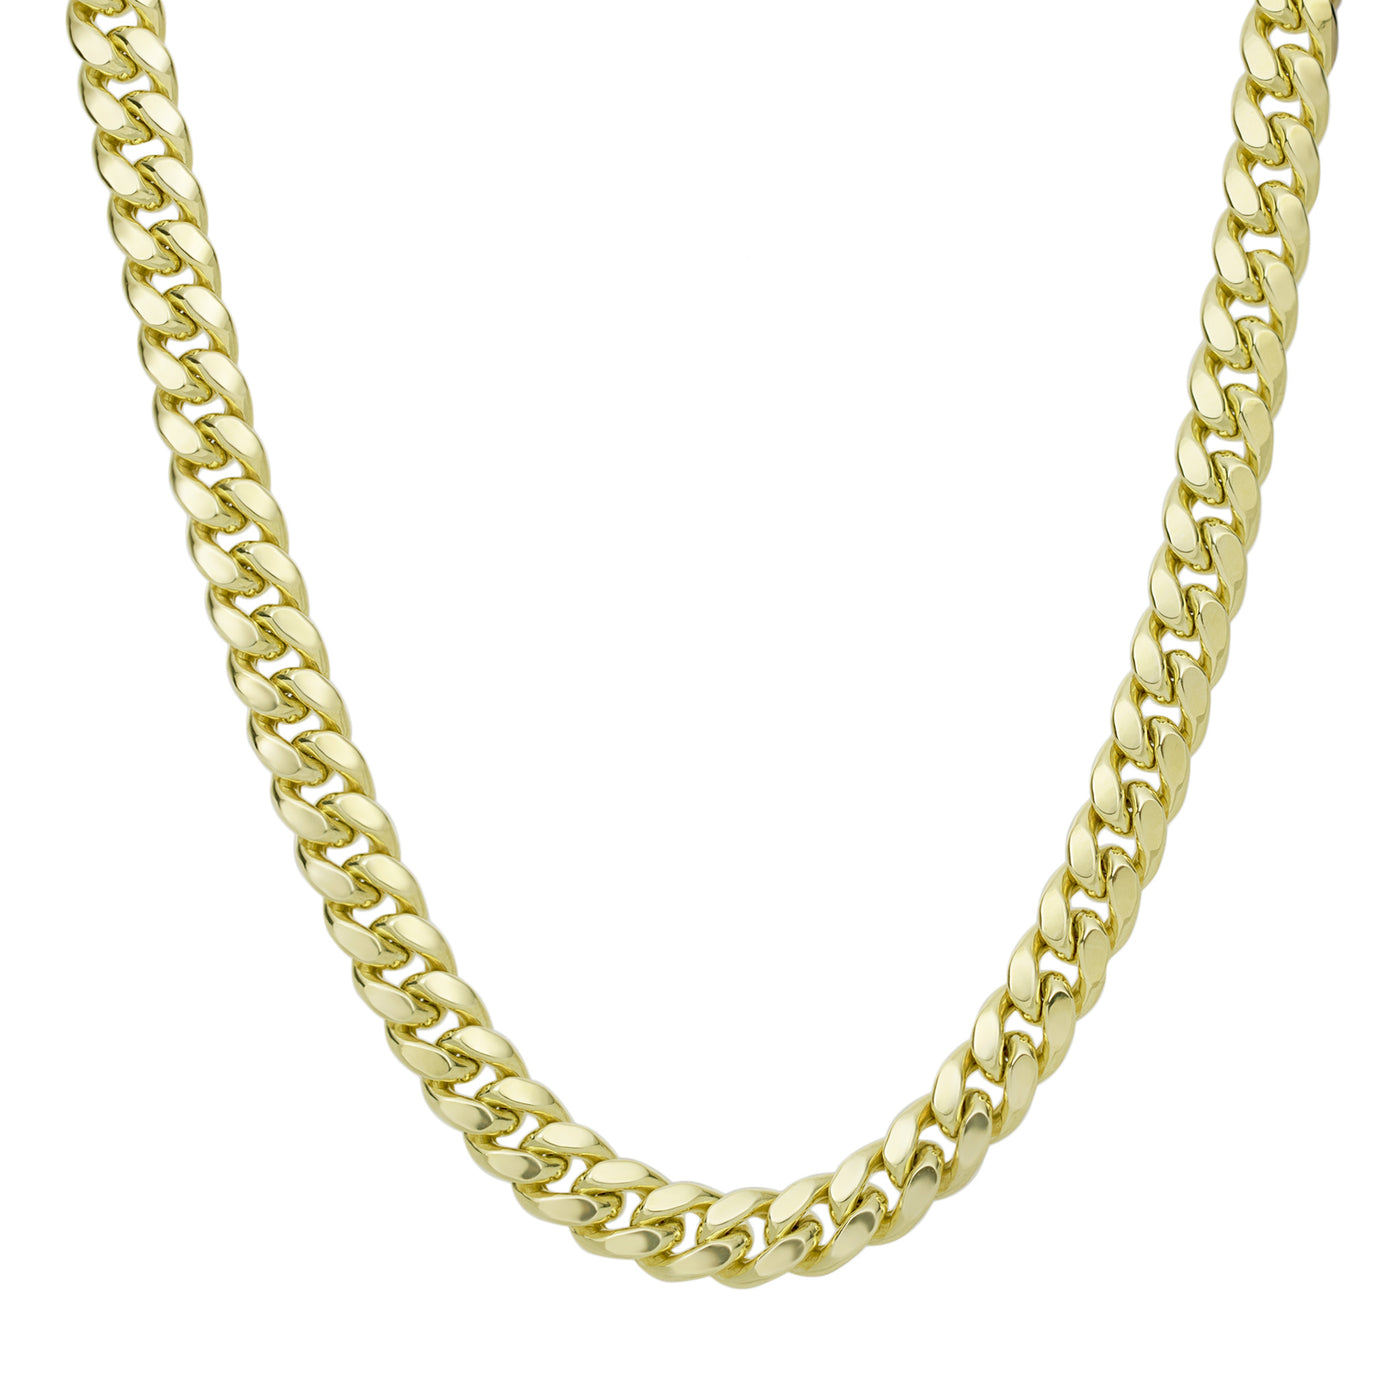 Miami Cuban Link Chain Necklace 10K Yellow Gold - Hollow